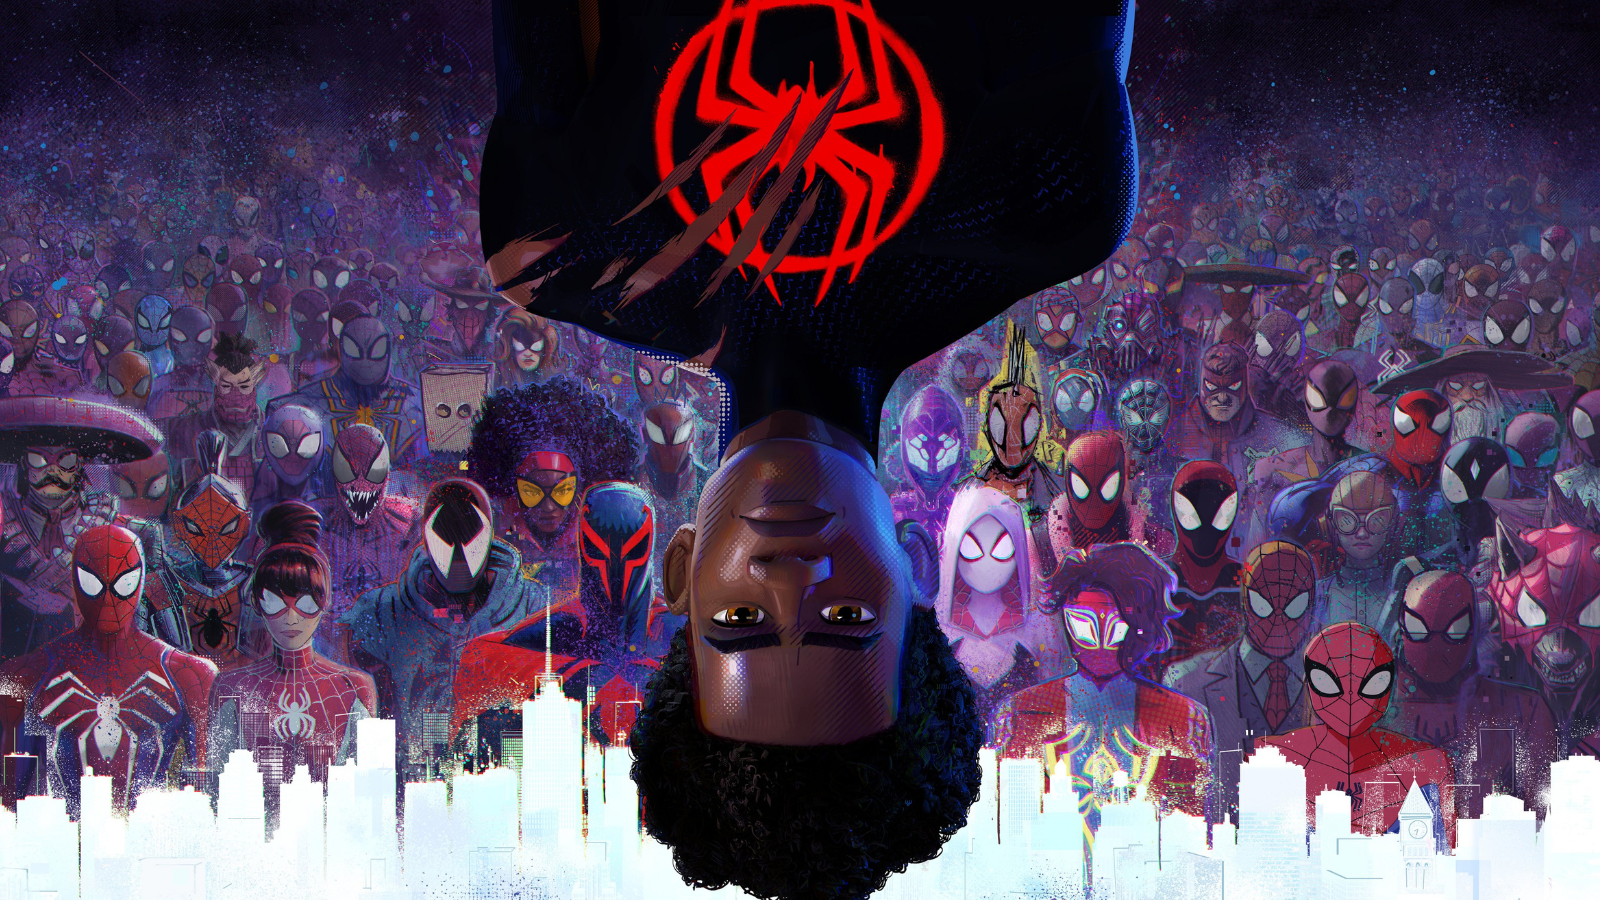 Character Posters For SPIDER-MAN: ACROSS THE SPIDER-VERSE